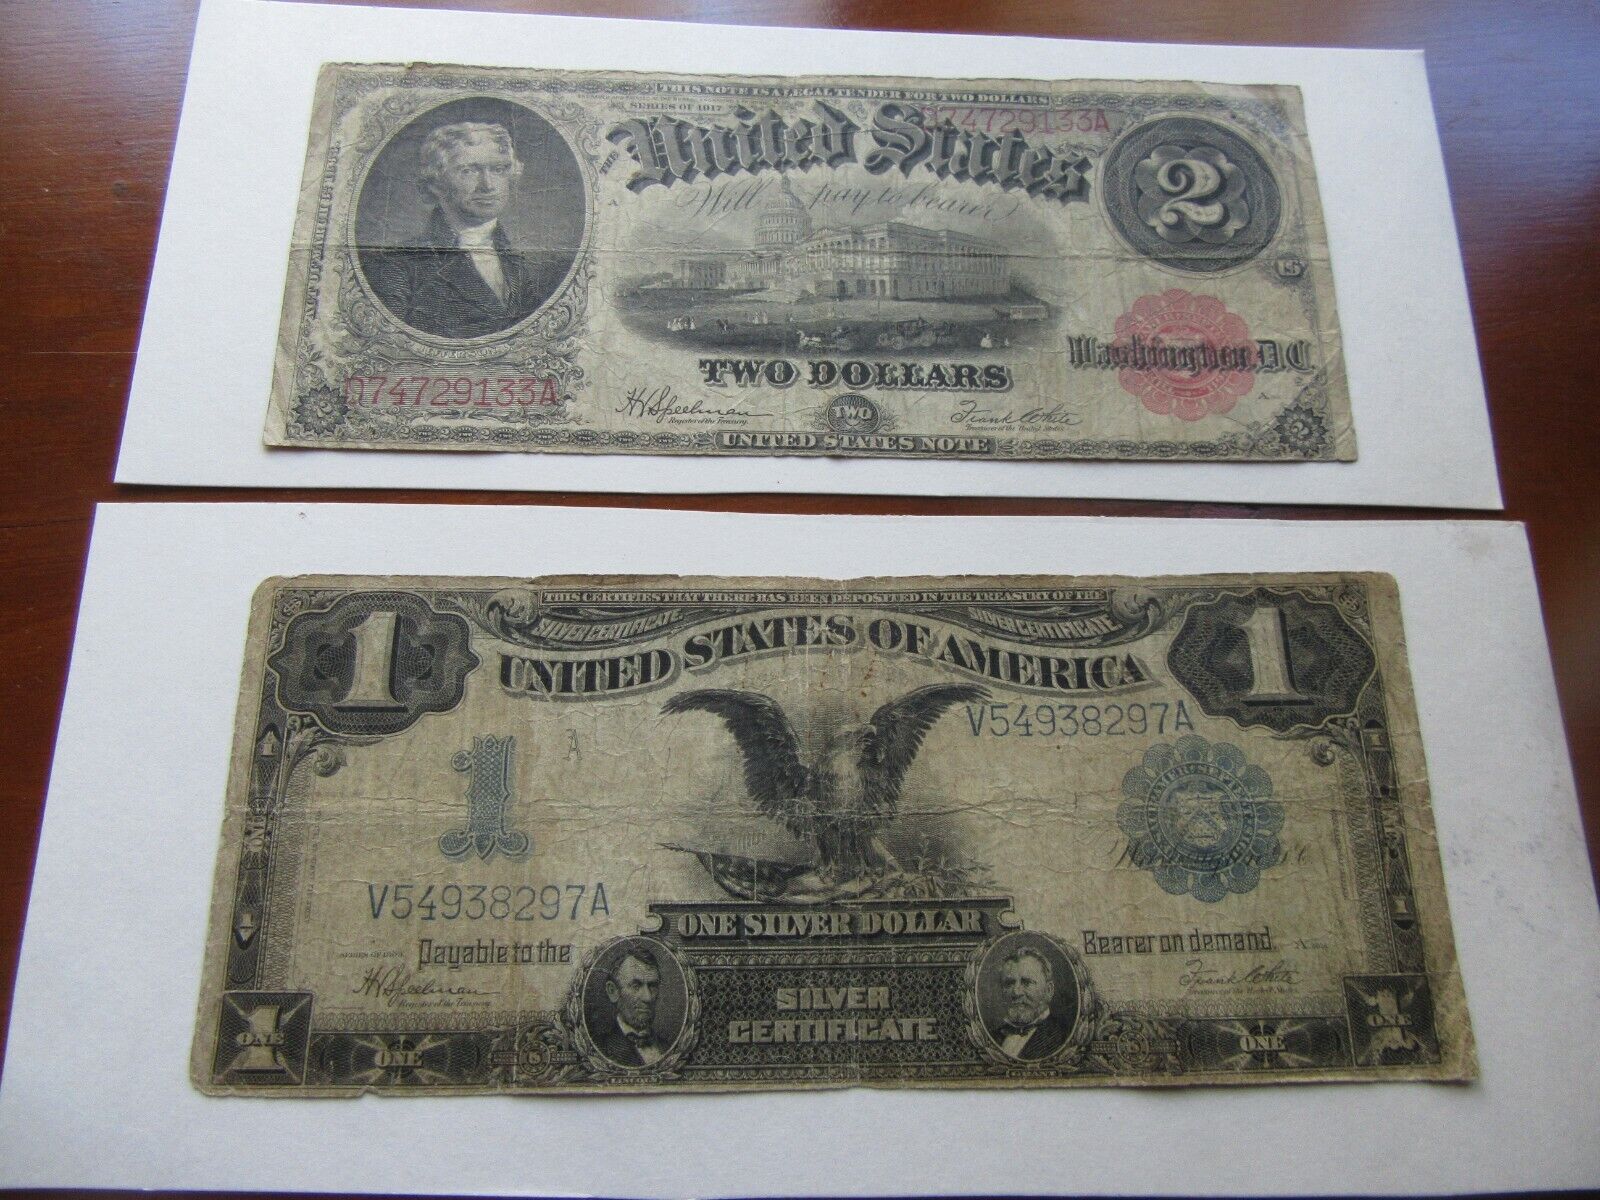 1899 $1 US BLACK EAGLE SILVER CERT and 1917 $2 US NOTE! Both signed Speelman/Whi